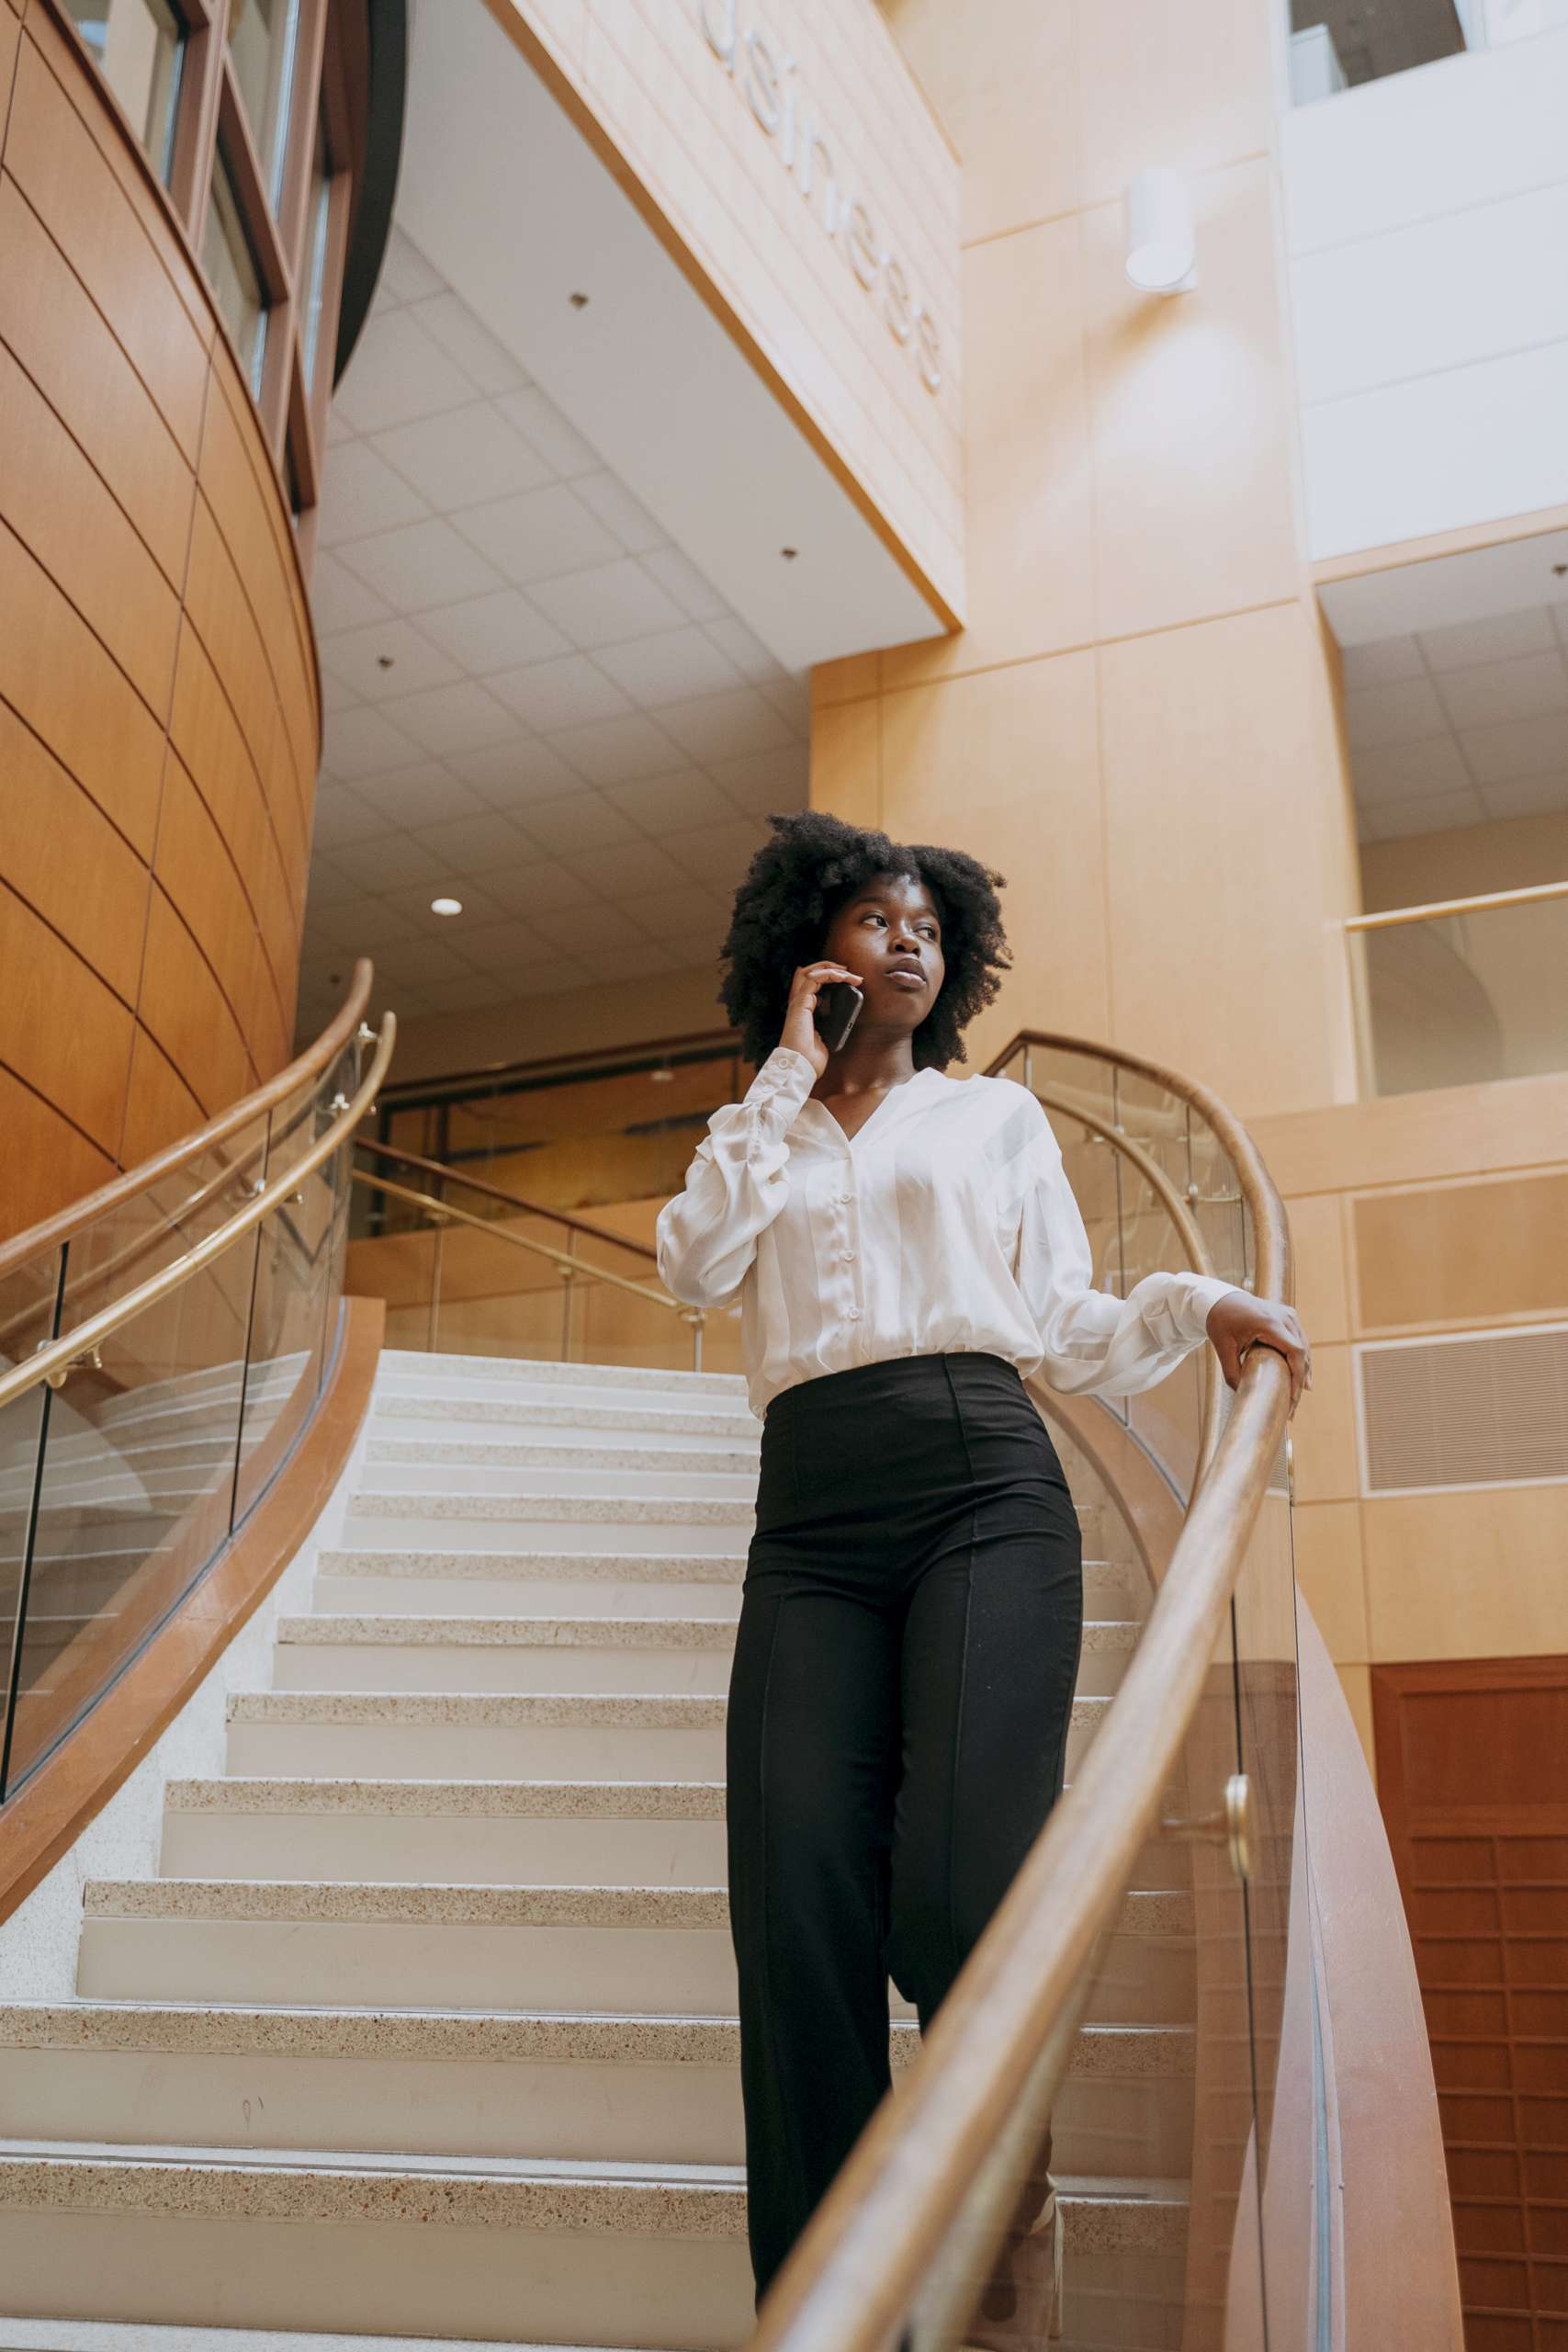 Professional black woman stands in stairwell on cellphone.